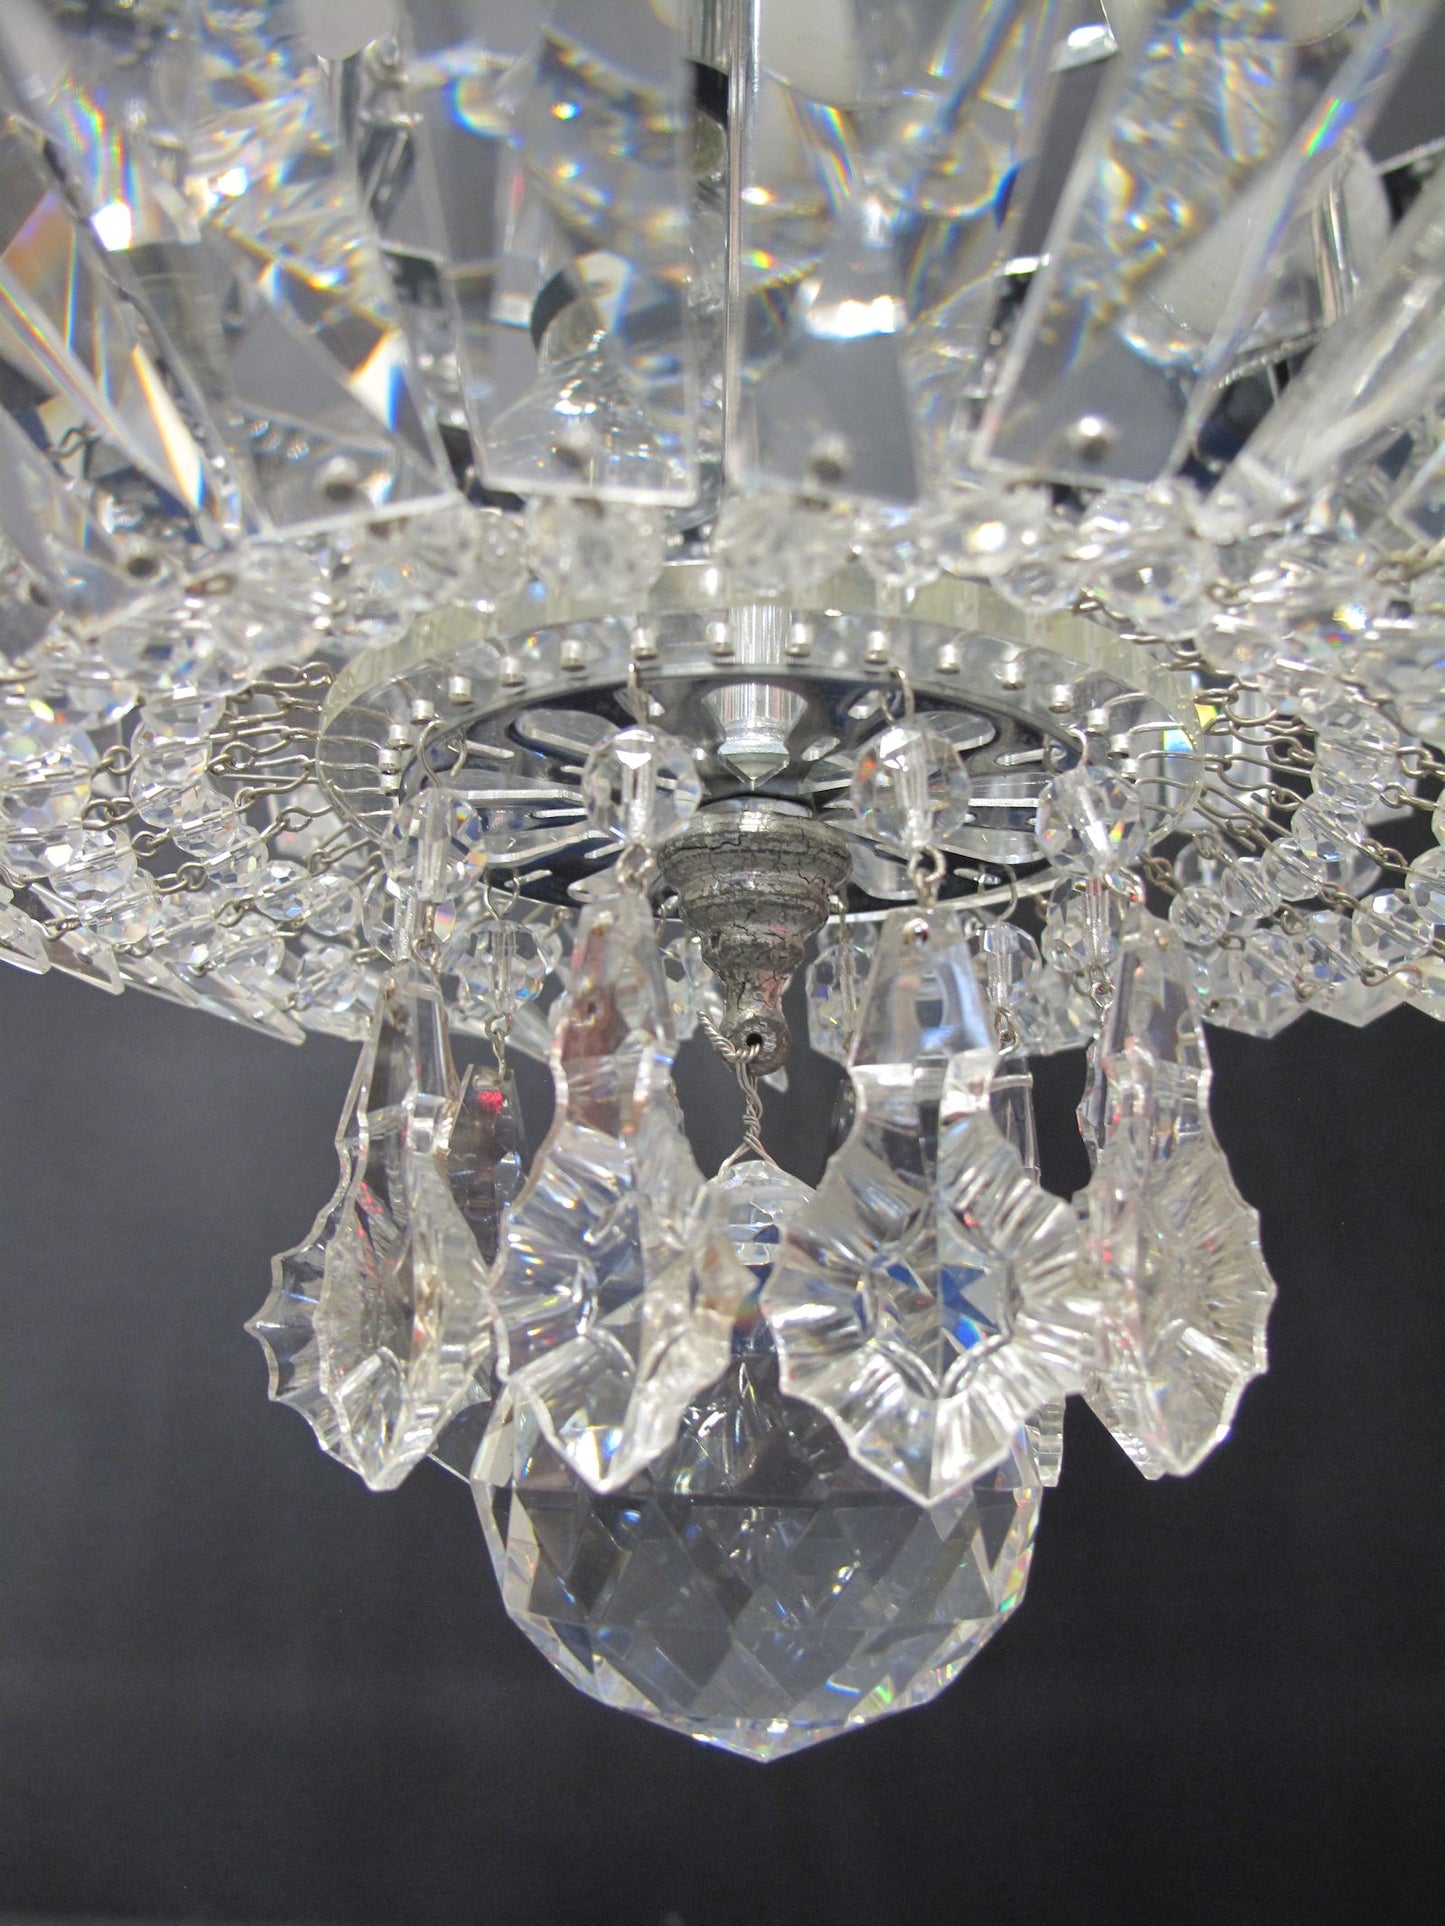 view of bottom part of chandelier